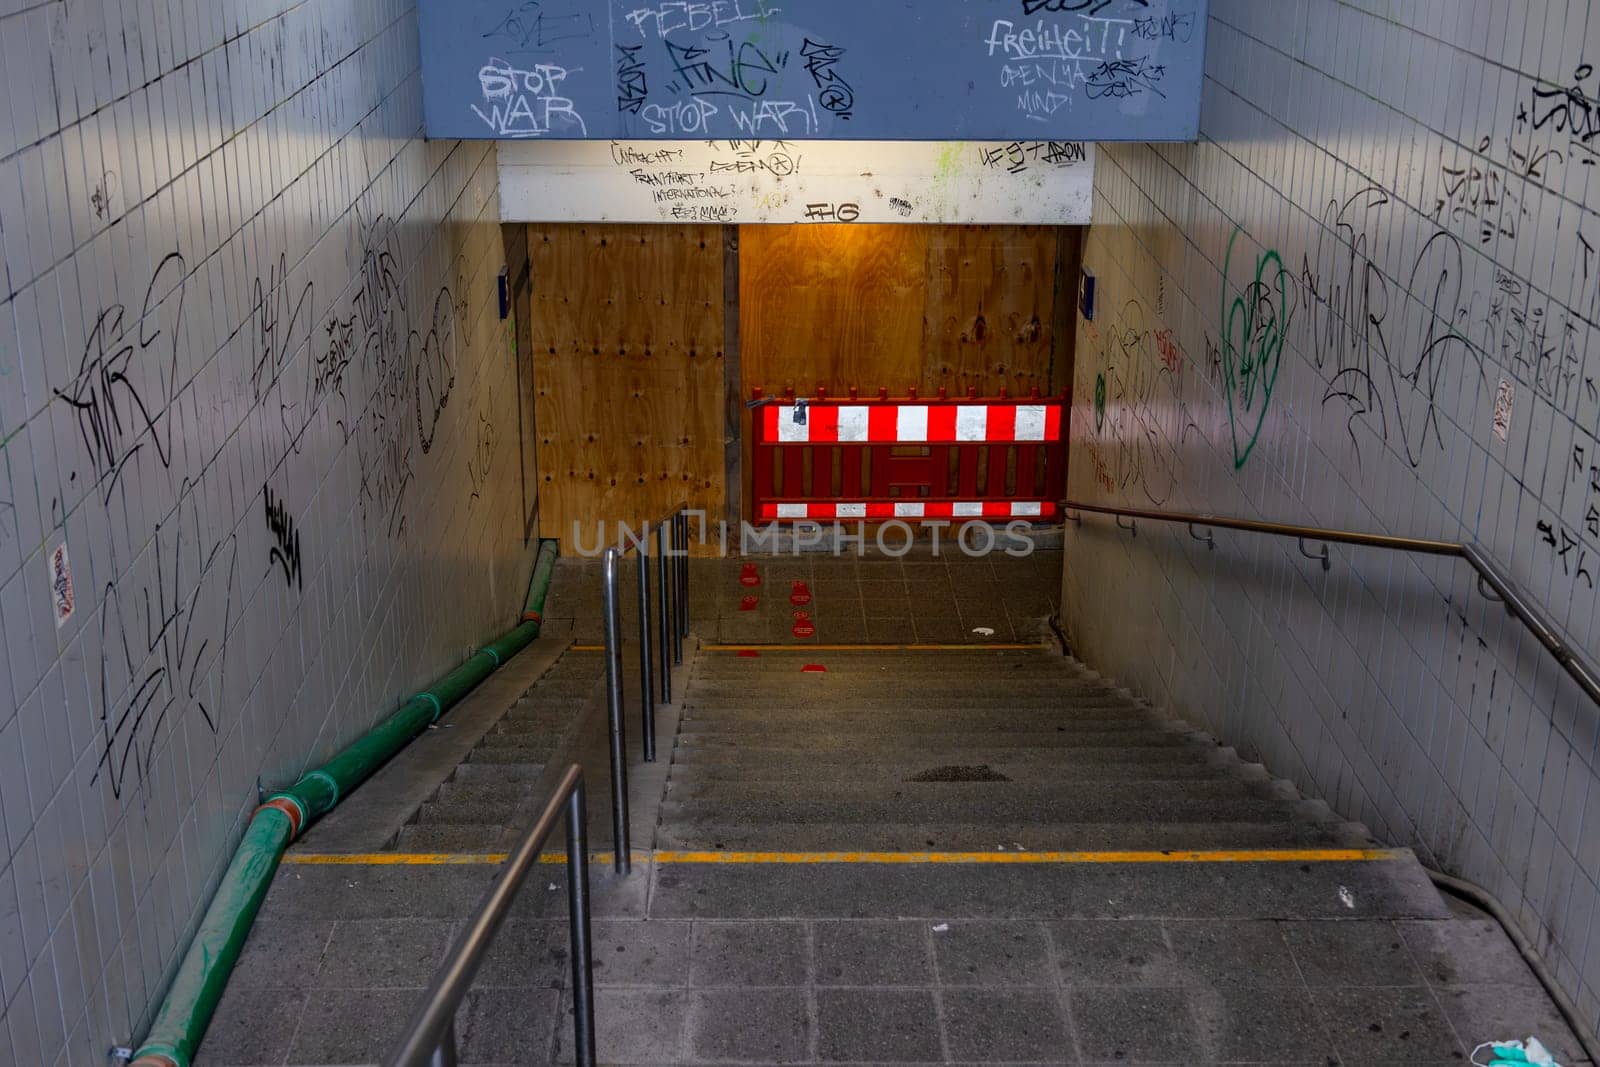 Fully lubricated walls at an exit with stairs at an underpass at a train station